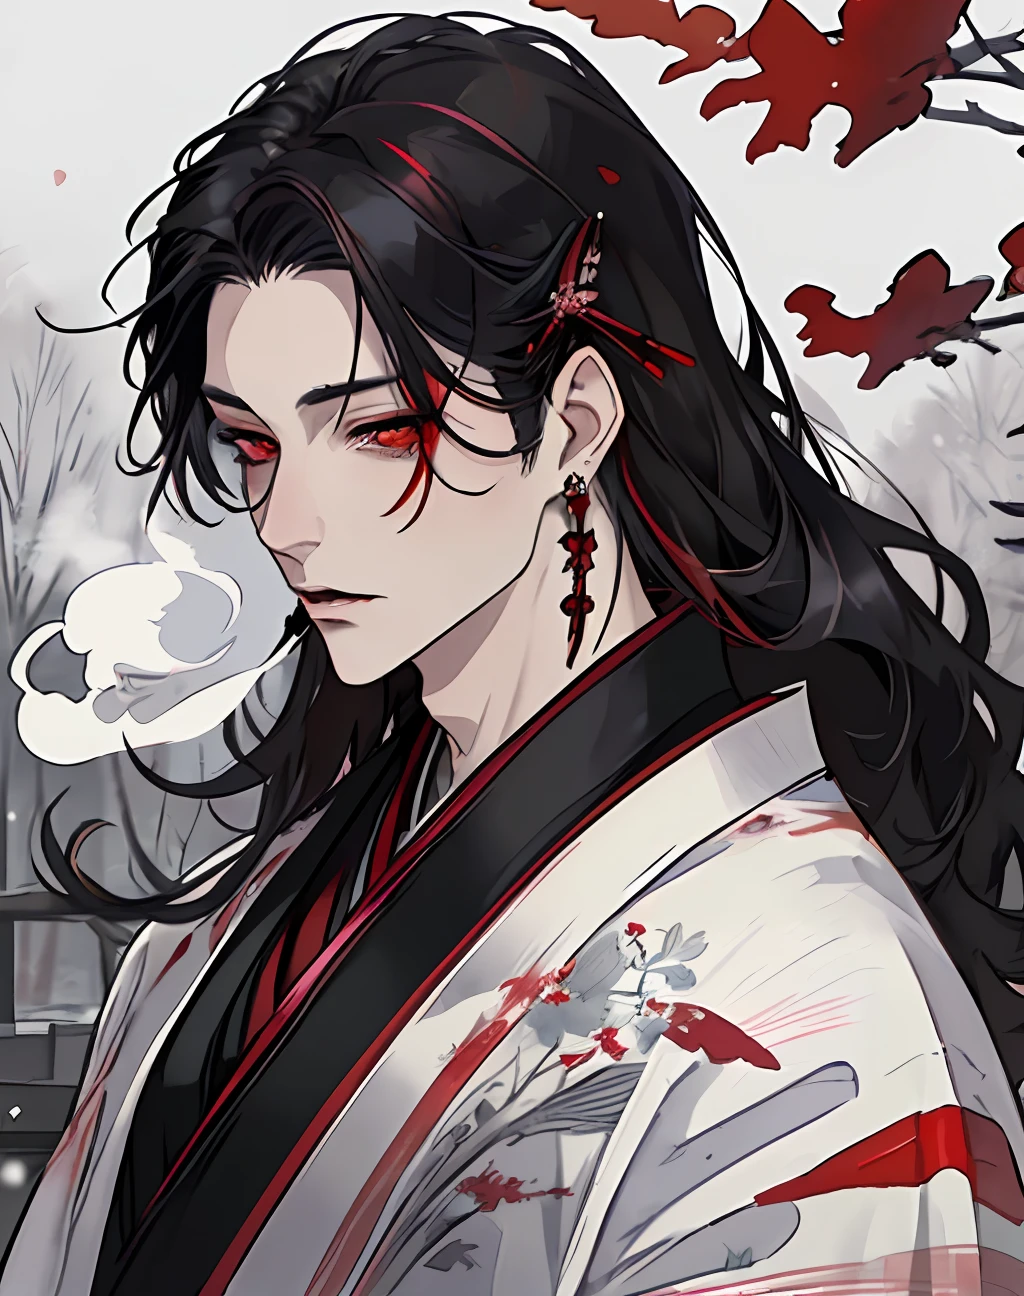 masterpiece, portrait, smoke, winter, snow, red and blck butterfly, snowy trees, watercolor, (((man))), kimono, red eyes, detaled eyes, black hair, long hair, perfect detailed face, night, attractive man, vampire, yoshiwara style, tabaco, pink skin, masculine, earrings, hair accesories,